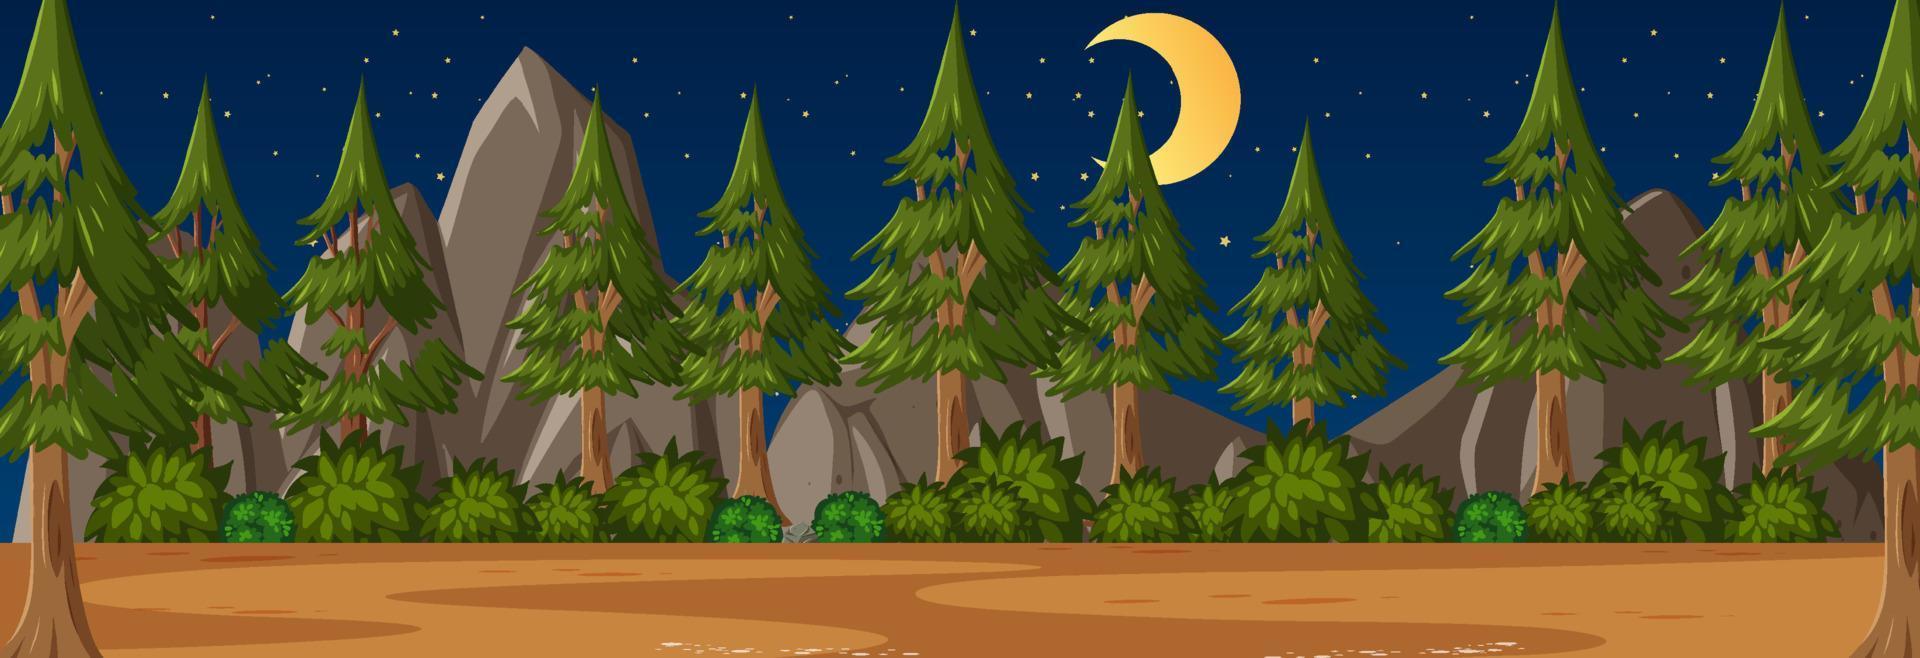 Forest horizontal scene at night with many pine trees background vector